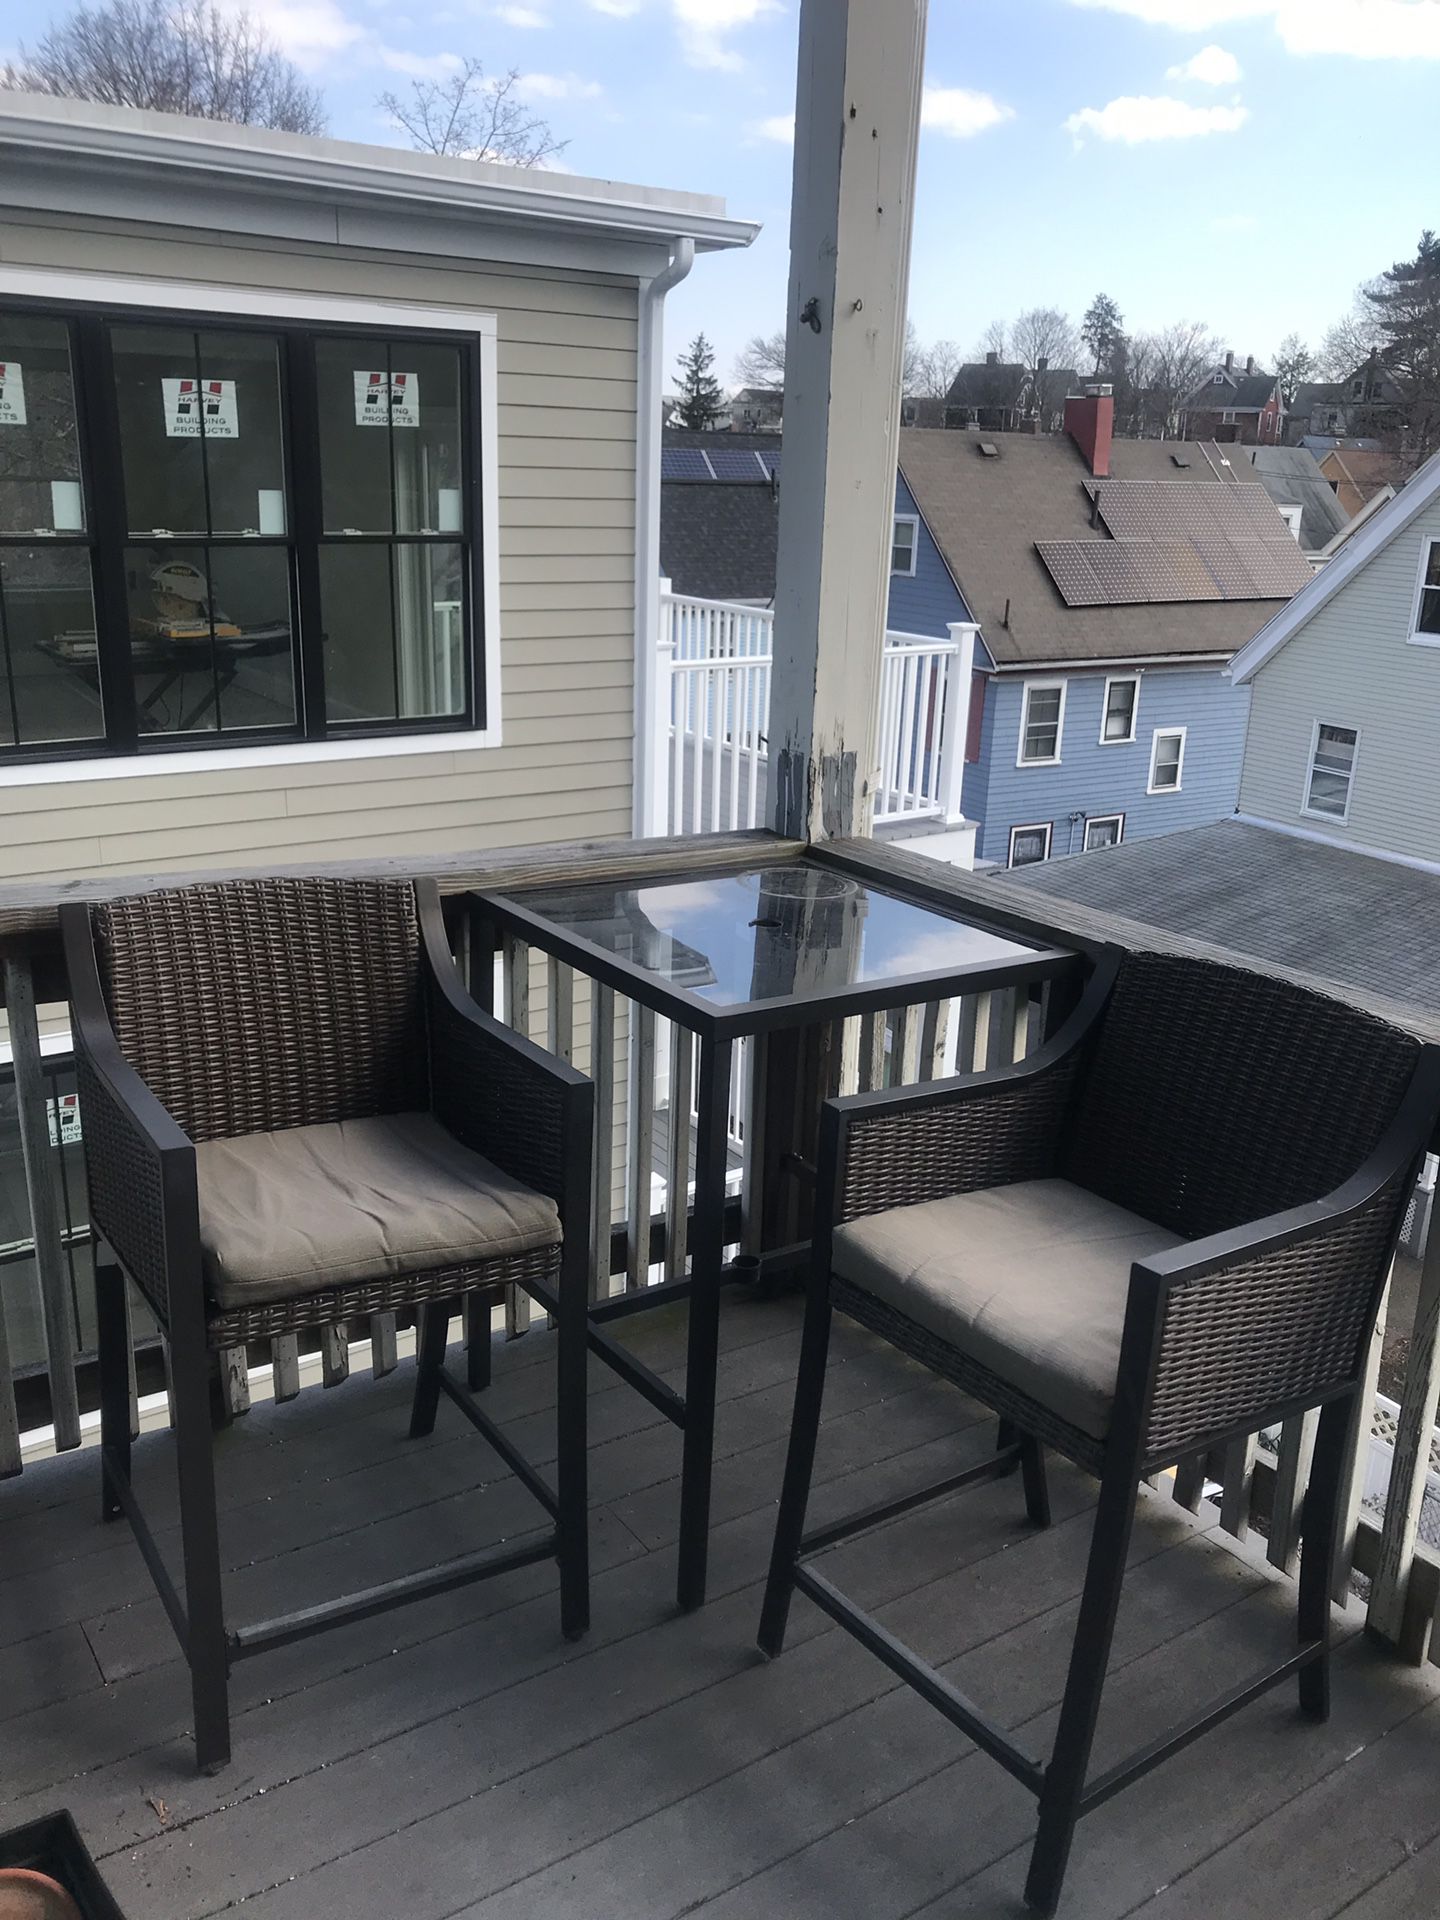 Theshold 4 Pieces Patio/Terrace furniture